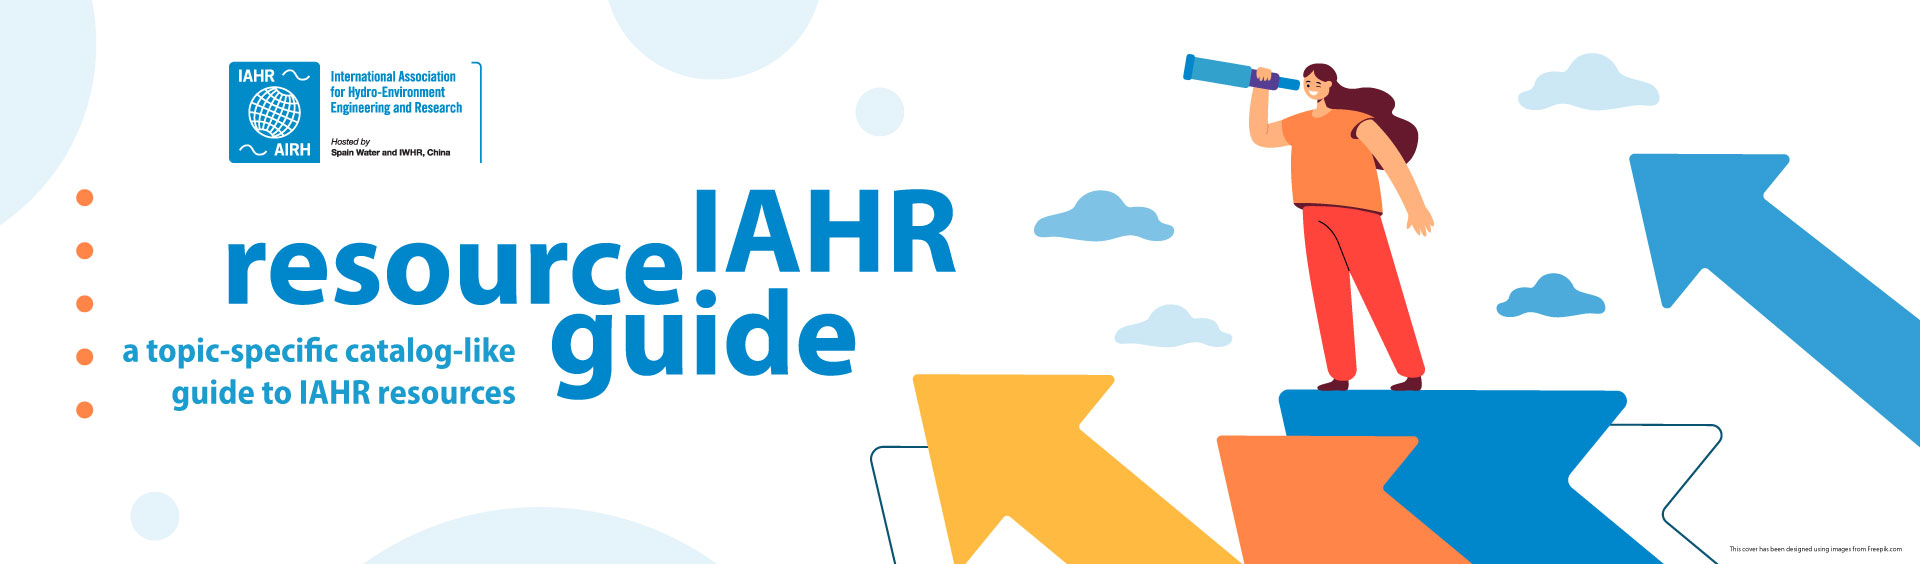 IAHR Resource Guide